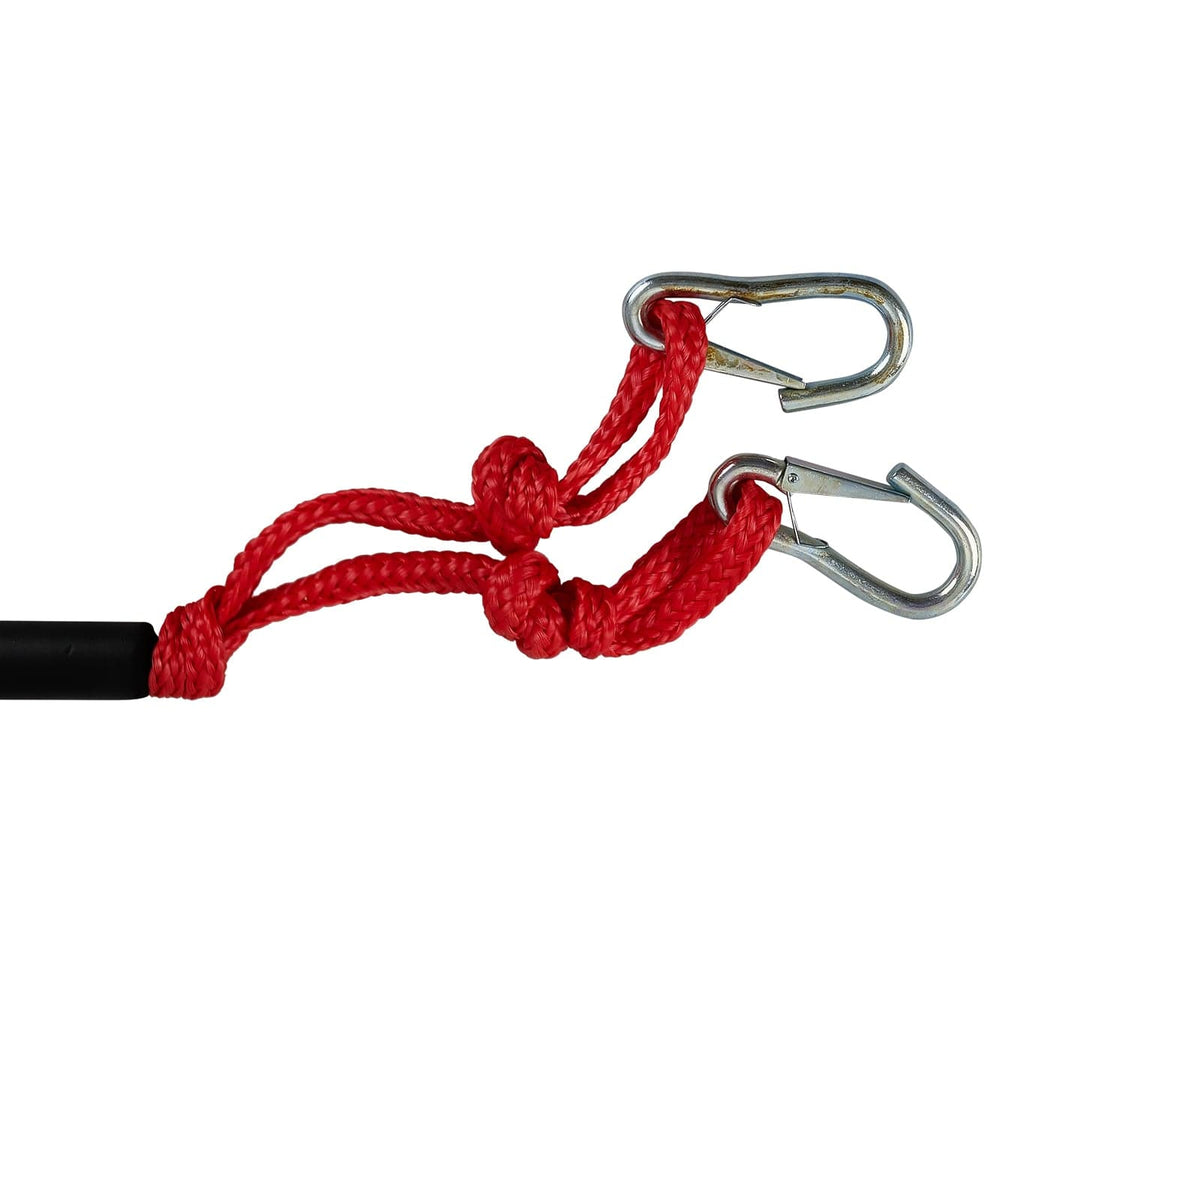 Double coat hook for sale - Wire rope stunter